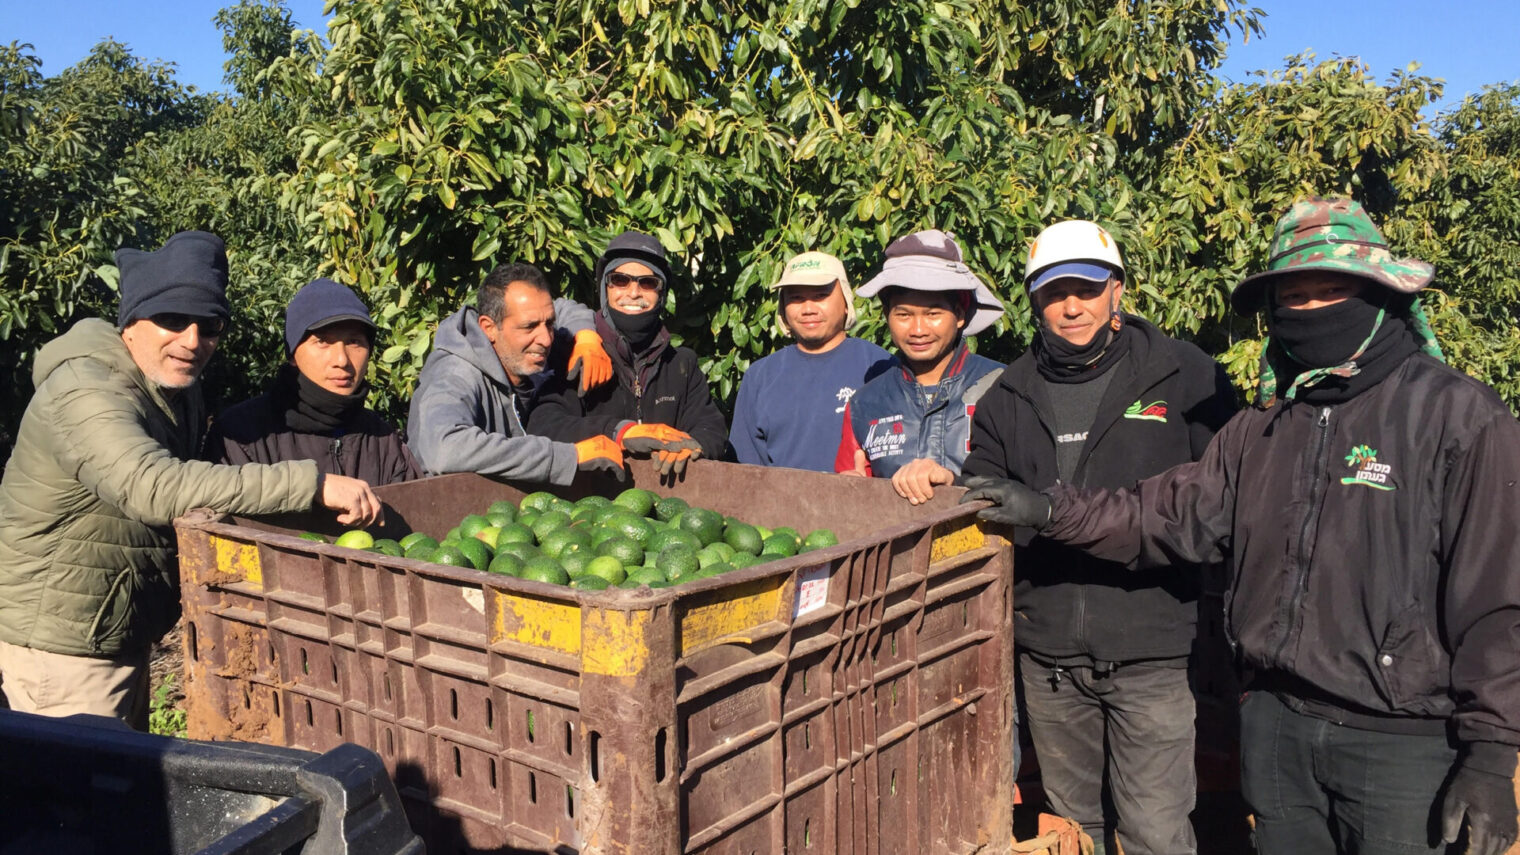 Avocado grove workers in Shavei Zion in the Western Galilee. Photo by Diana Bletter